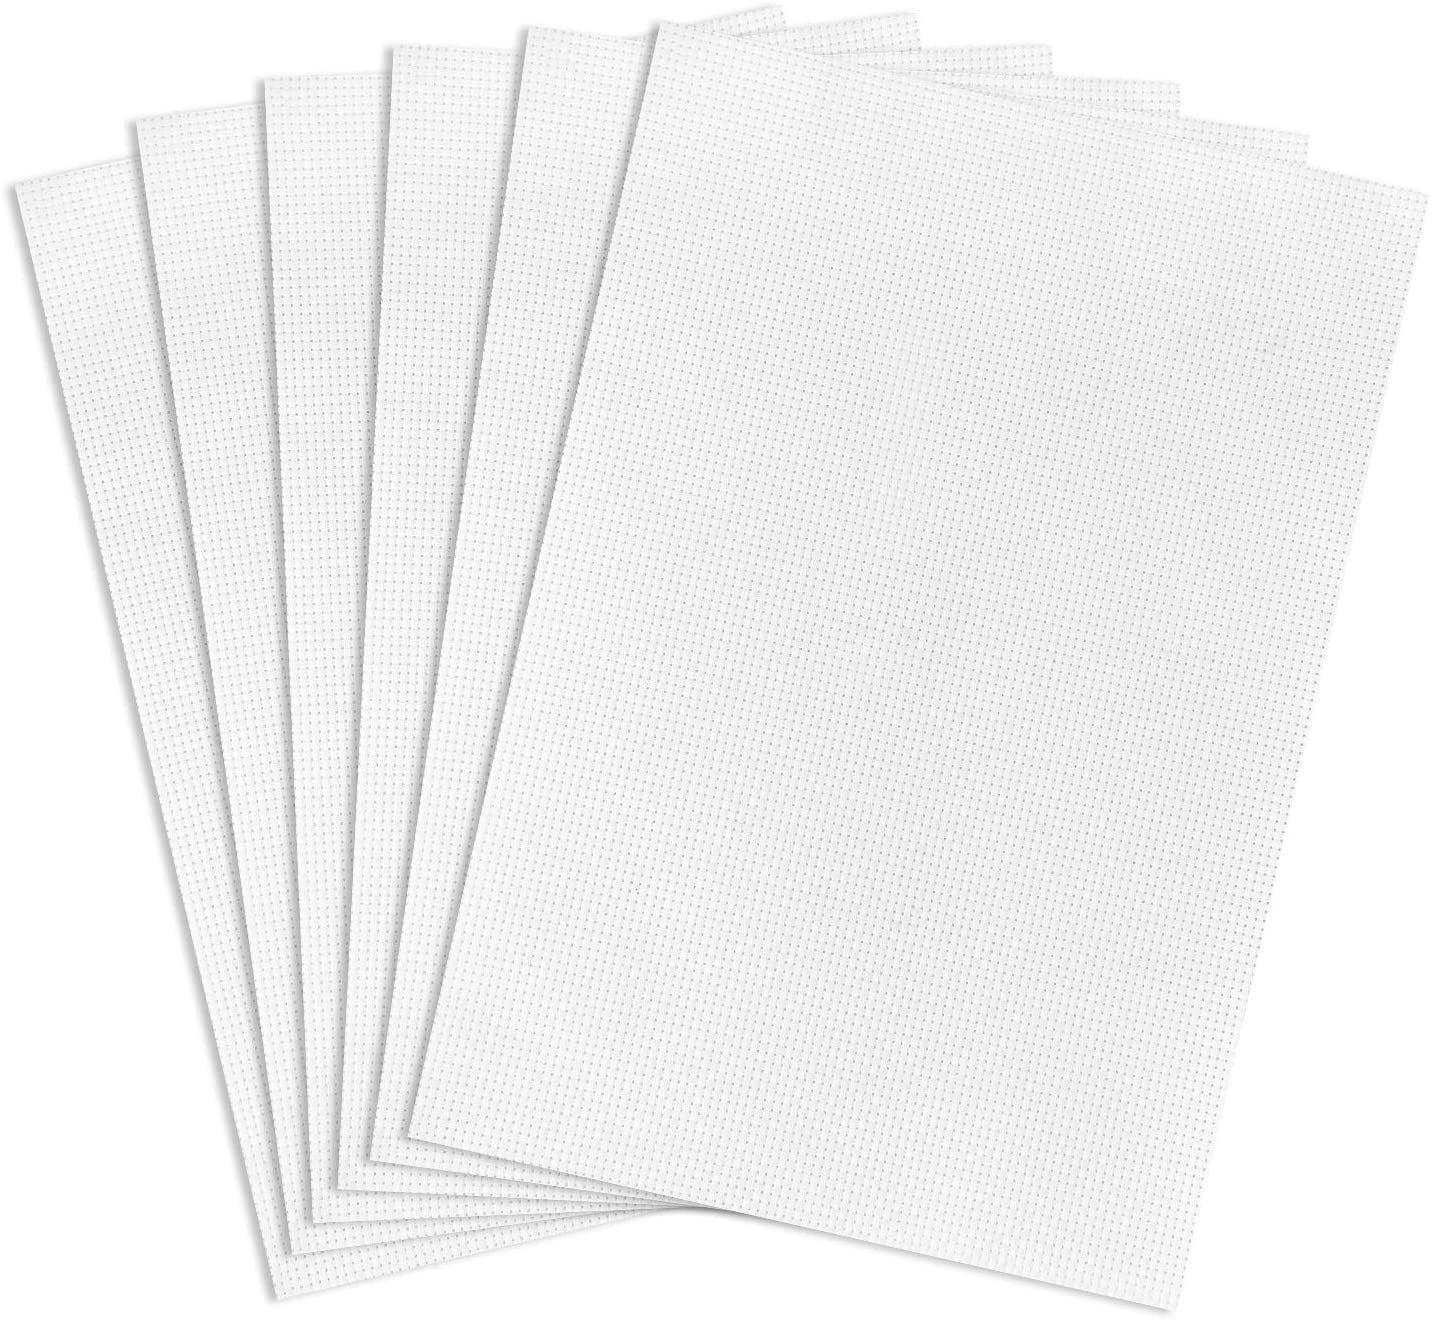 White Classic Reserve Counted Cotton Aida Cloth Cross Stitch Cloth Fabric 12 by 18-Inch 4 Pieces 14 Count and 4 Pieces 11 Count for Gift Fashion Ideas 8 PCS Aida Cloth 